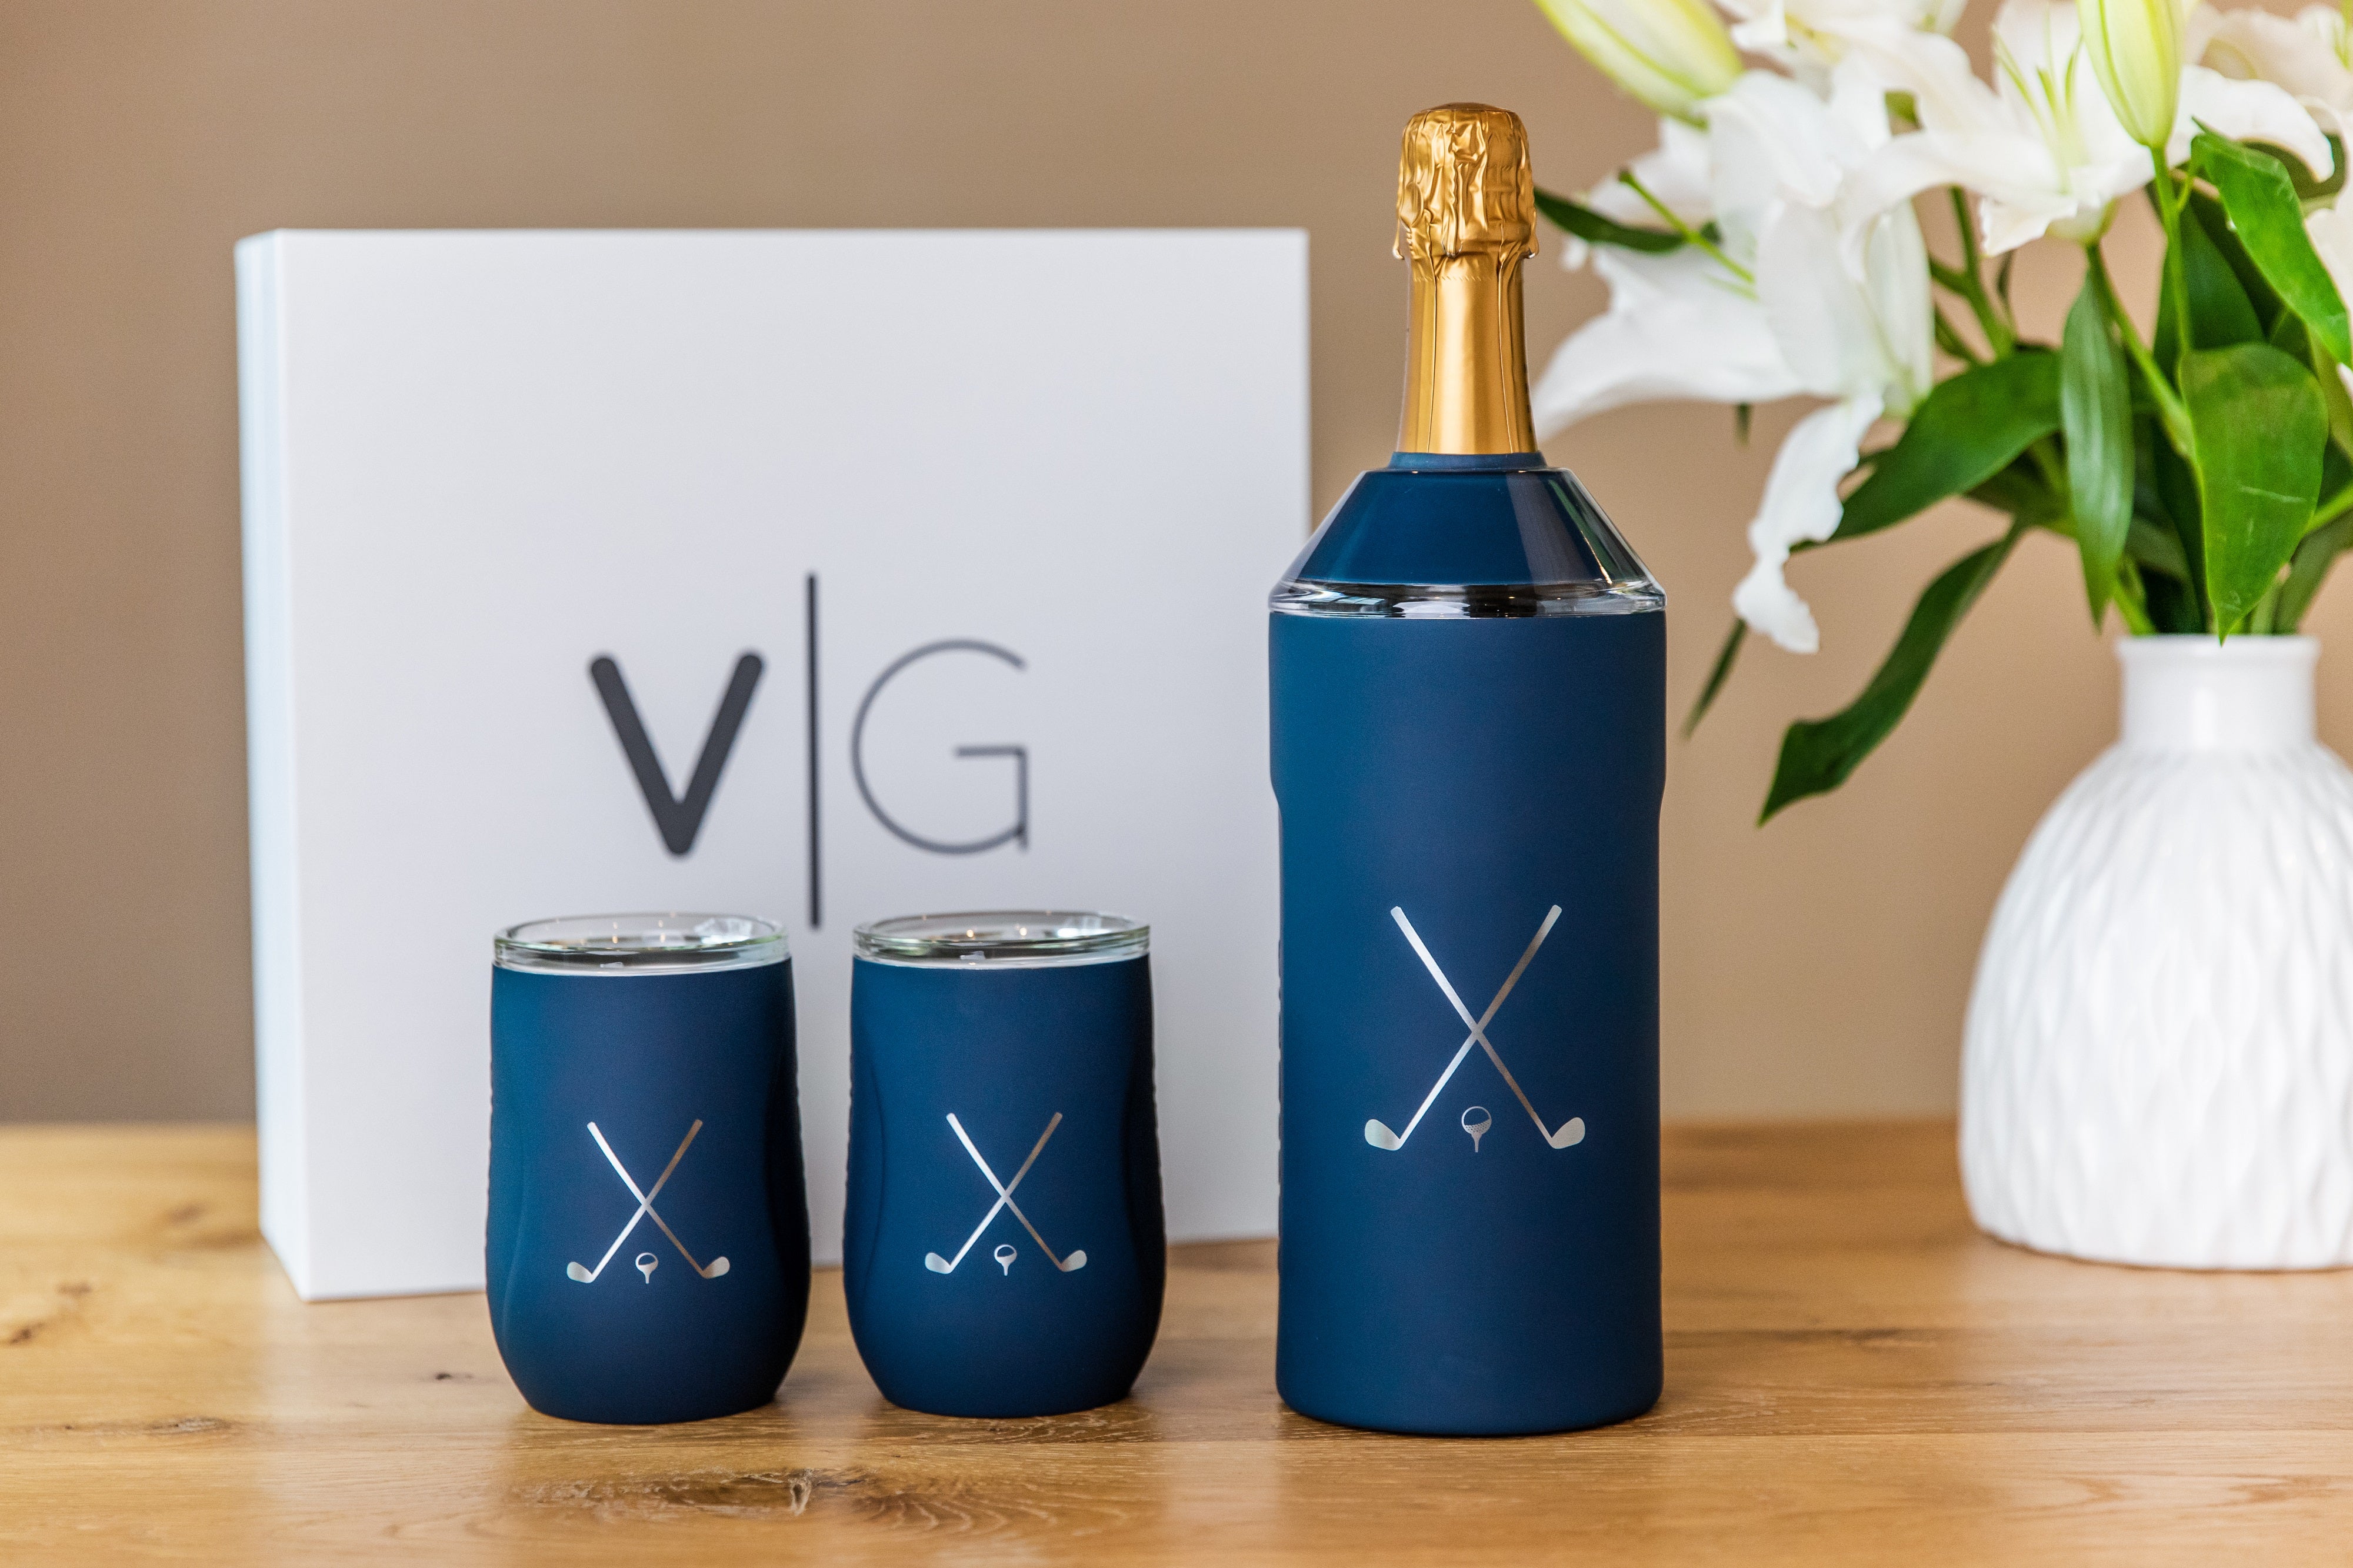 Limited Edition Golf Set of 2 Whiskey in Navy  The Original Wine Chiller.  Stainless tumblers and drinkware